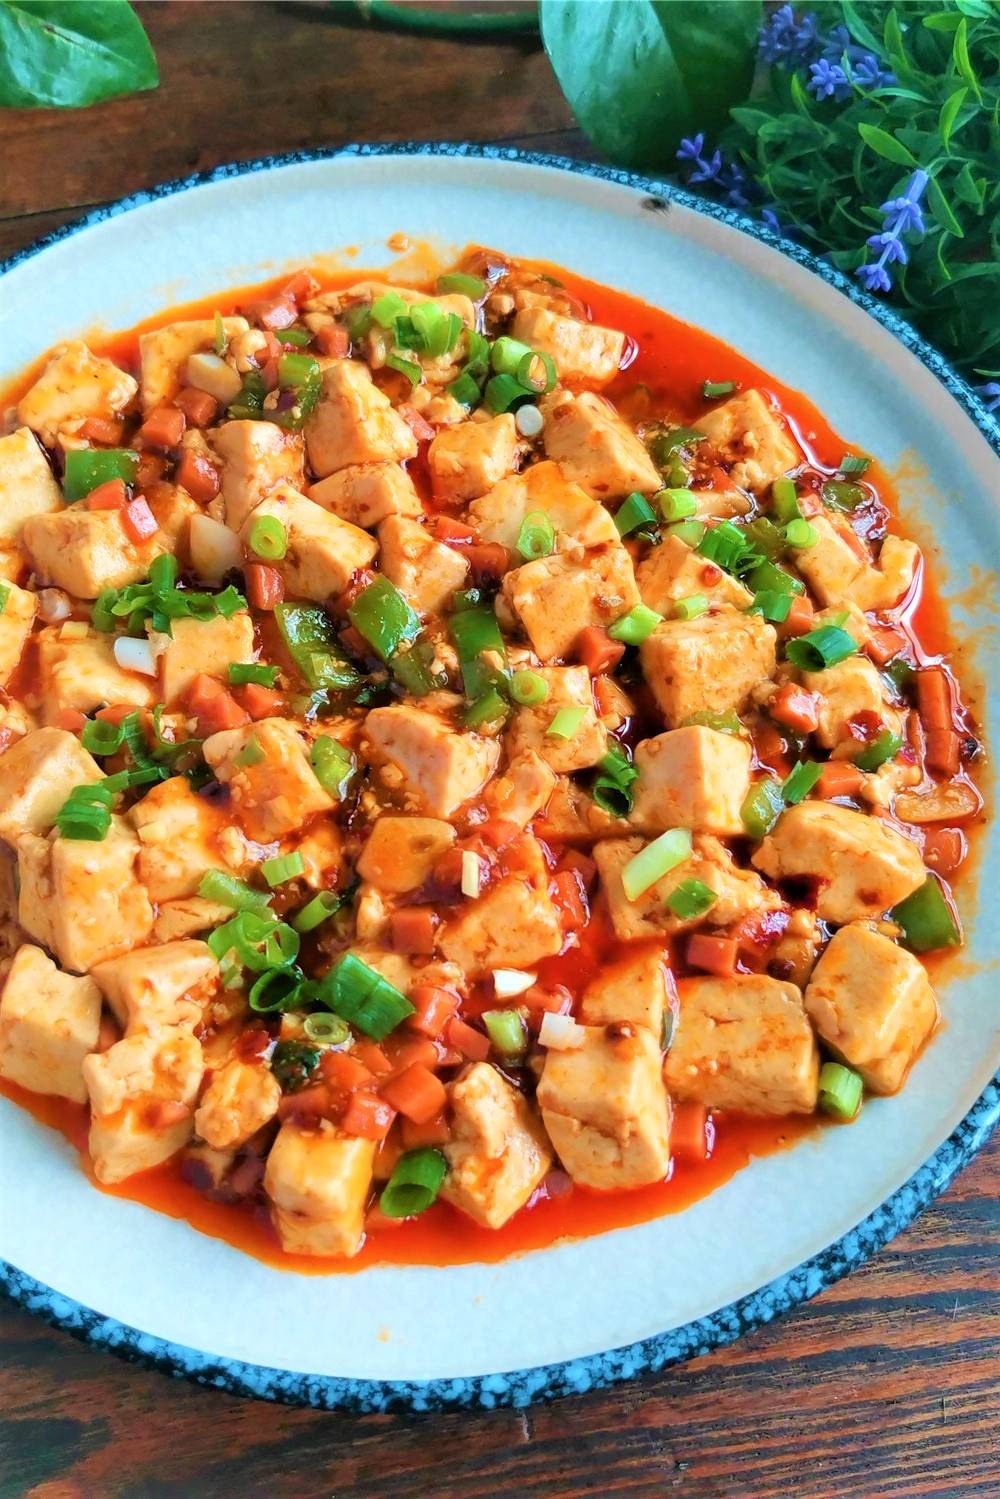 Simple tofu recipes Chinese style 2020